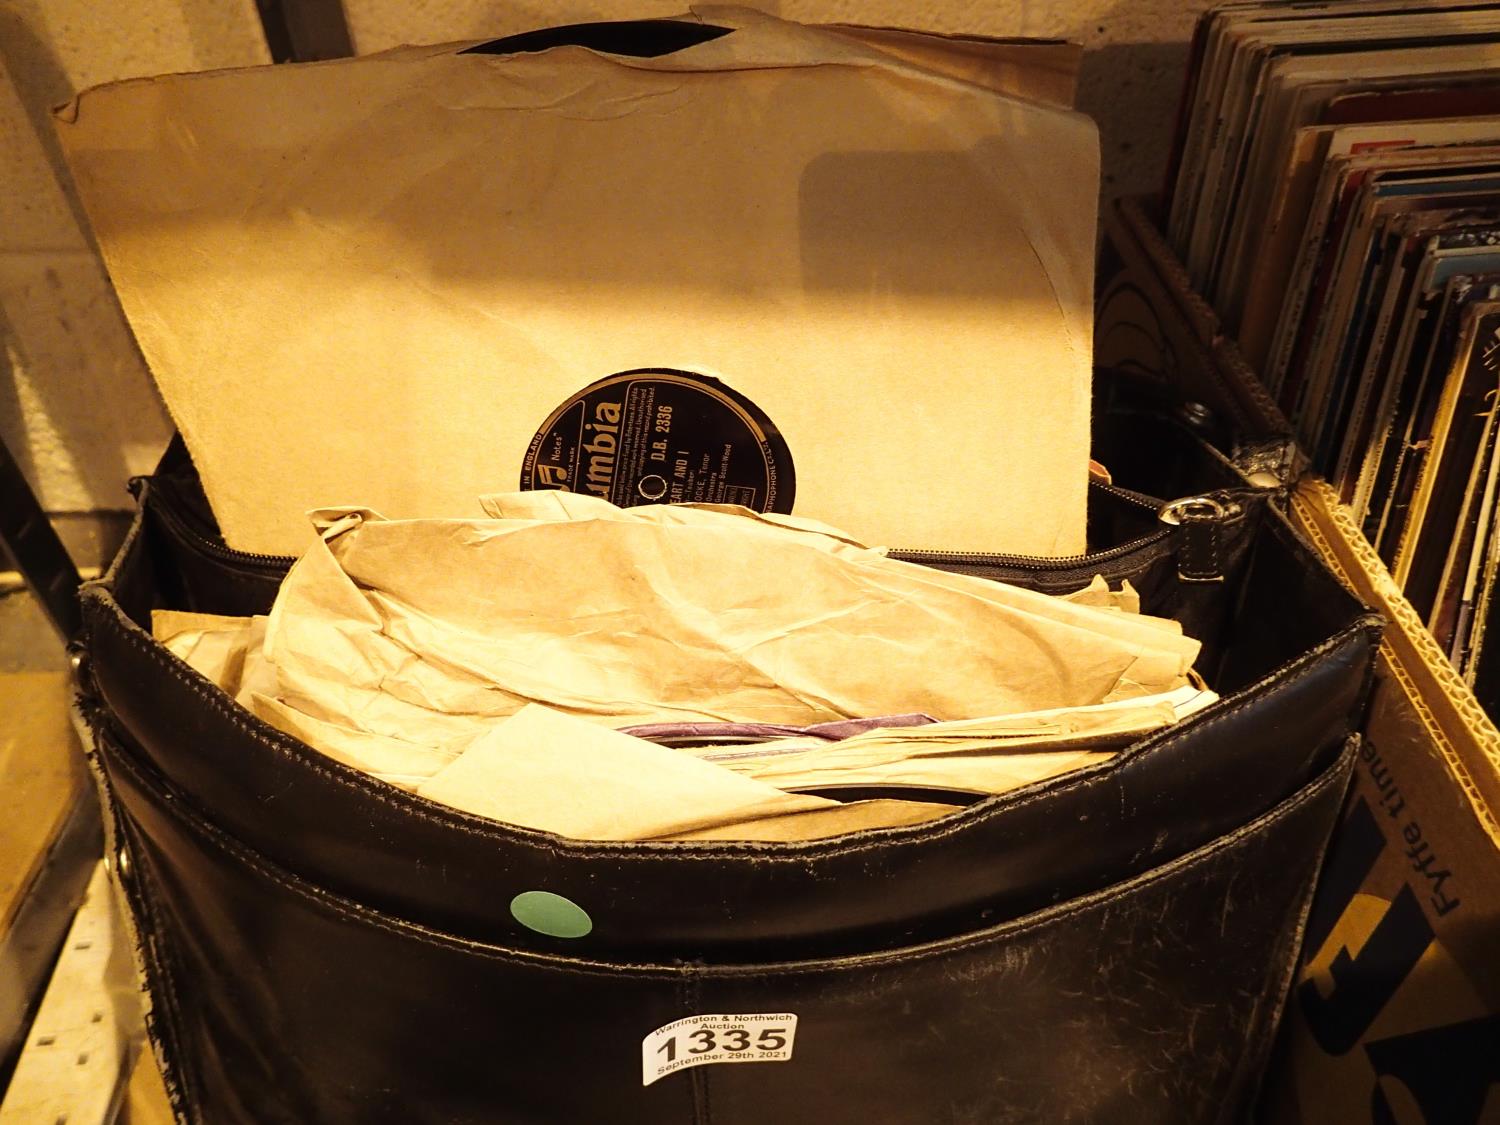 Case of approximately 75, 78s records. Not available for in-house P&P, contact Paul O'Hea at